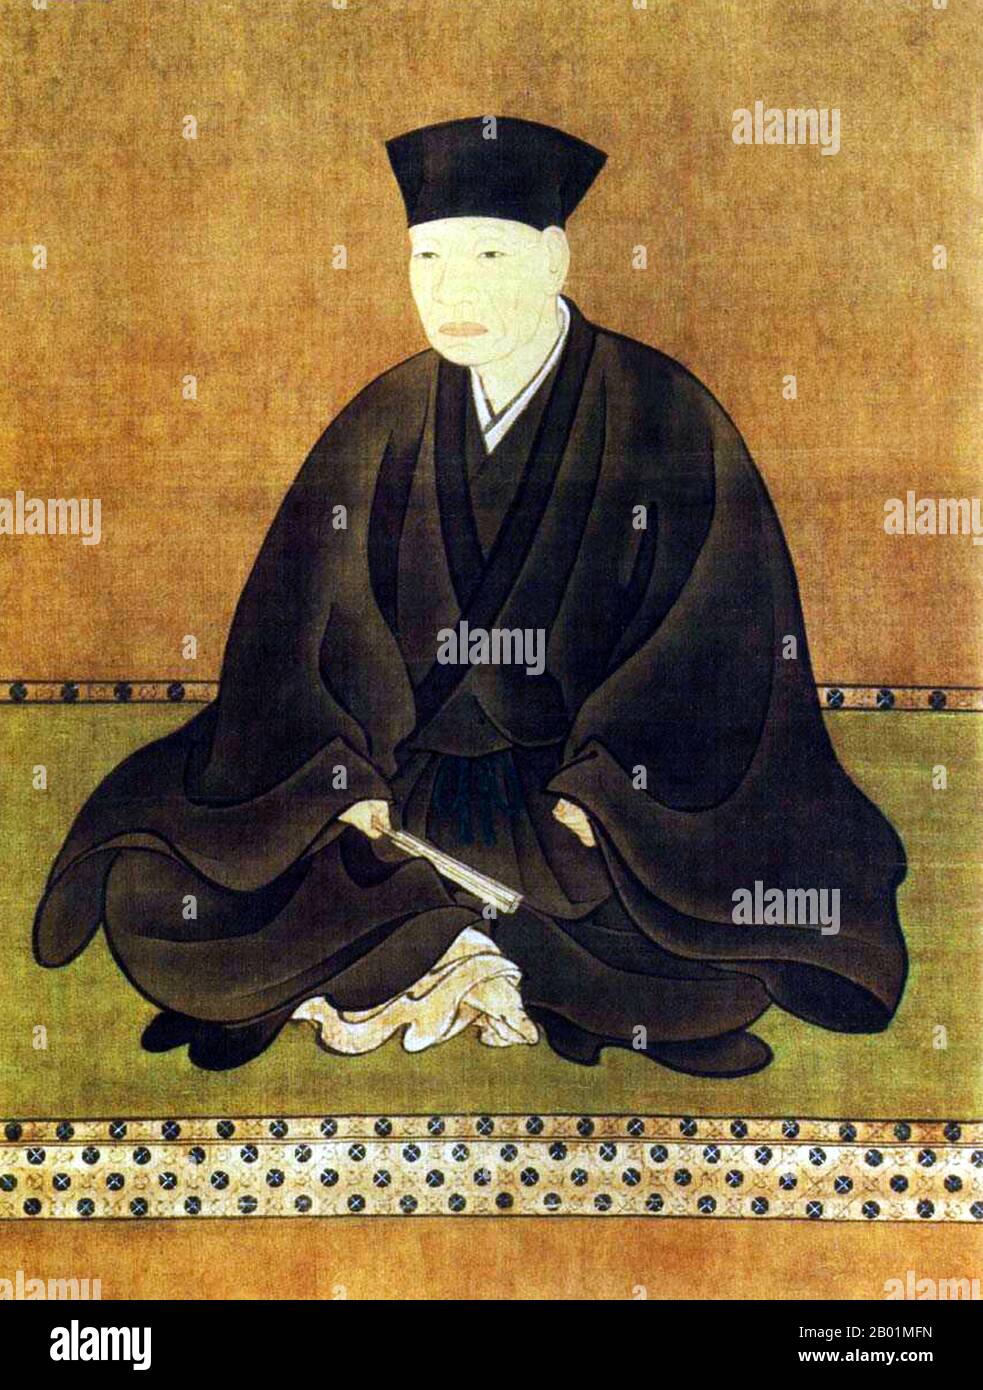 Sen no Rikyū (千利休, 1522 - April 21, 1591, also known simply as Sen Rikyū), is considered the historical figure with the most profound influence on chanoyu (茶の湯), the Japanese 'Way of Tea', particularly the tradition of wabi-cha.  He was also the first to emphasize several key aspects of the ceremony, including rustic simplicity, directness of approach and honesty of self. Originating from the Edo Period and the Muromachi Period, these aspects of the tea ceremony persist today. Stock Photo